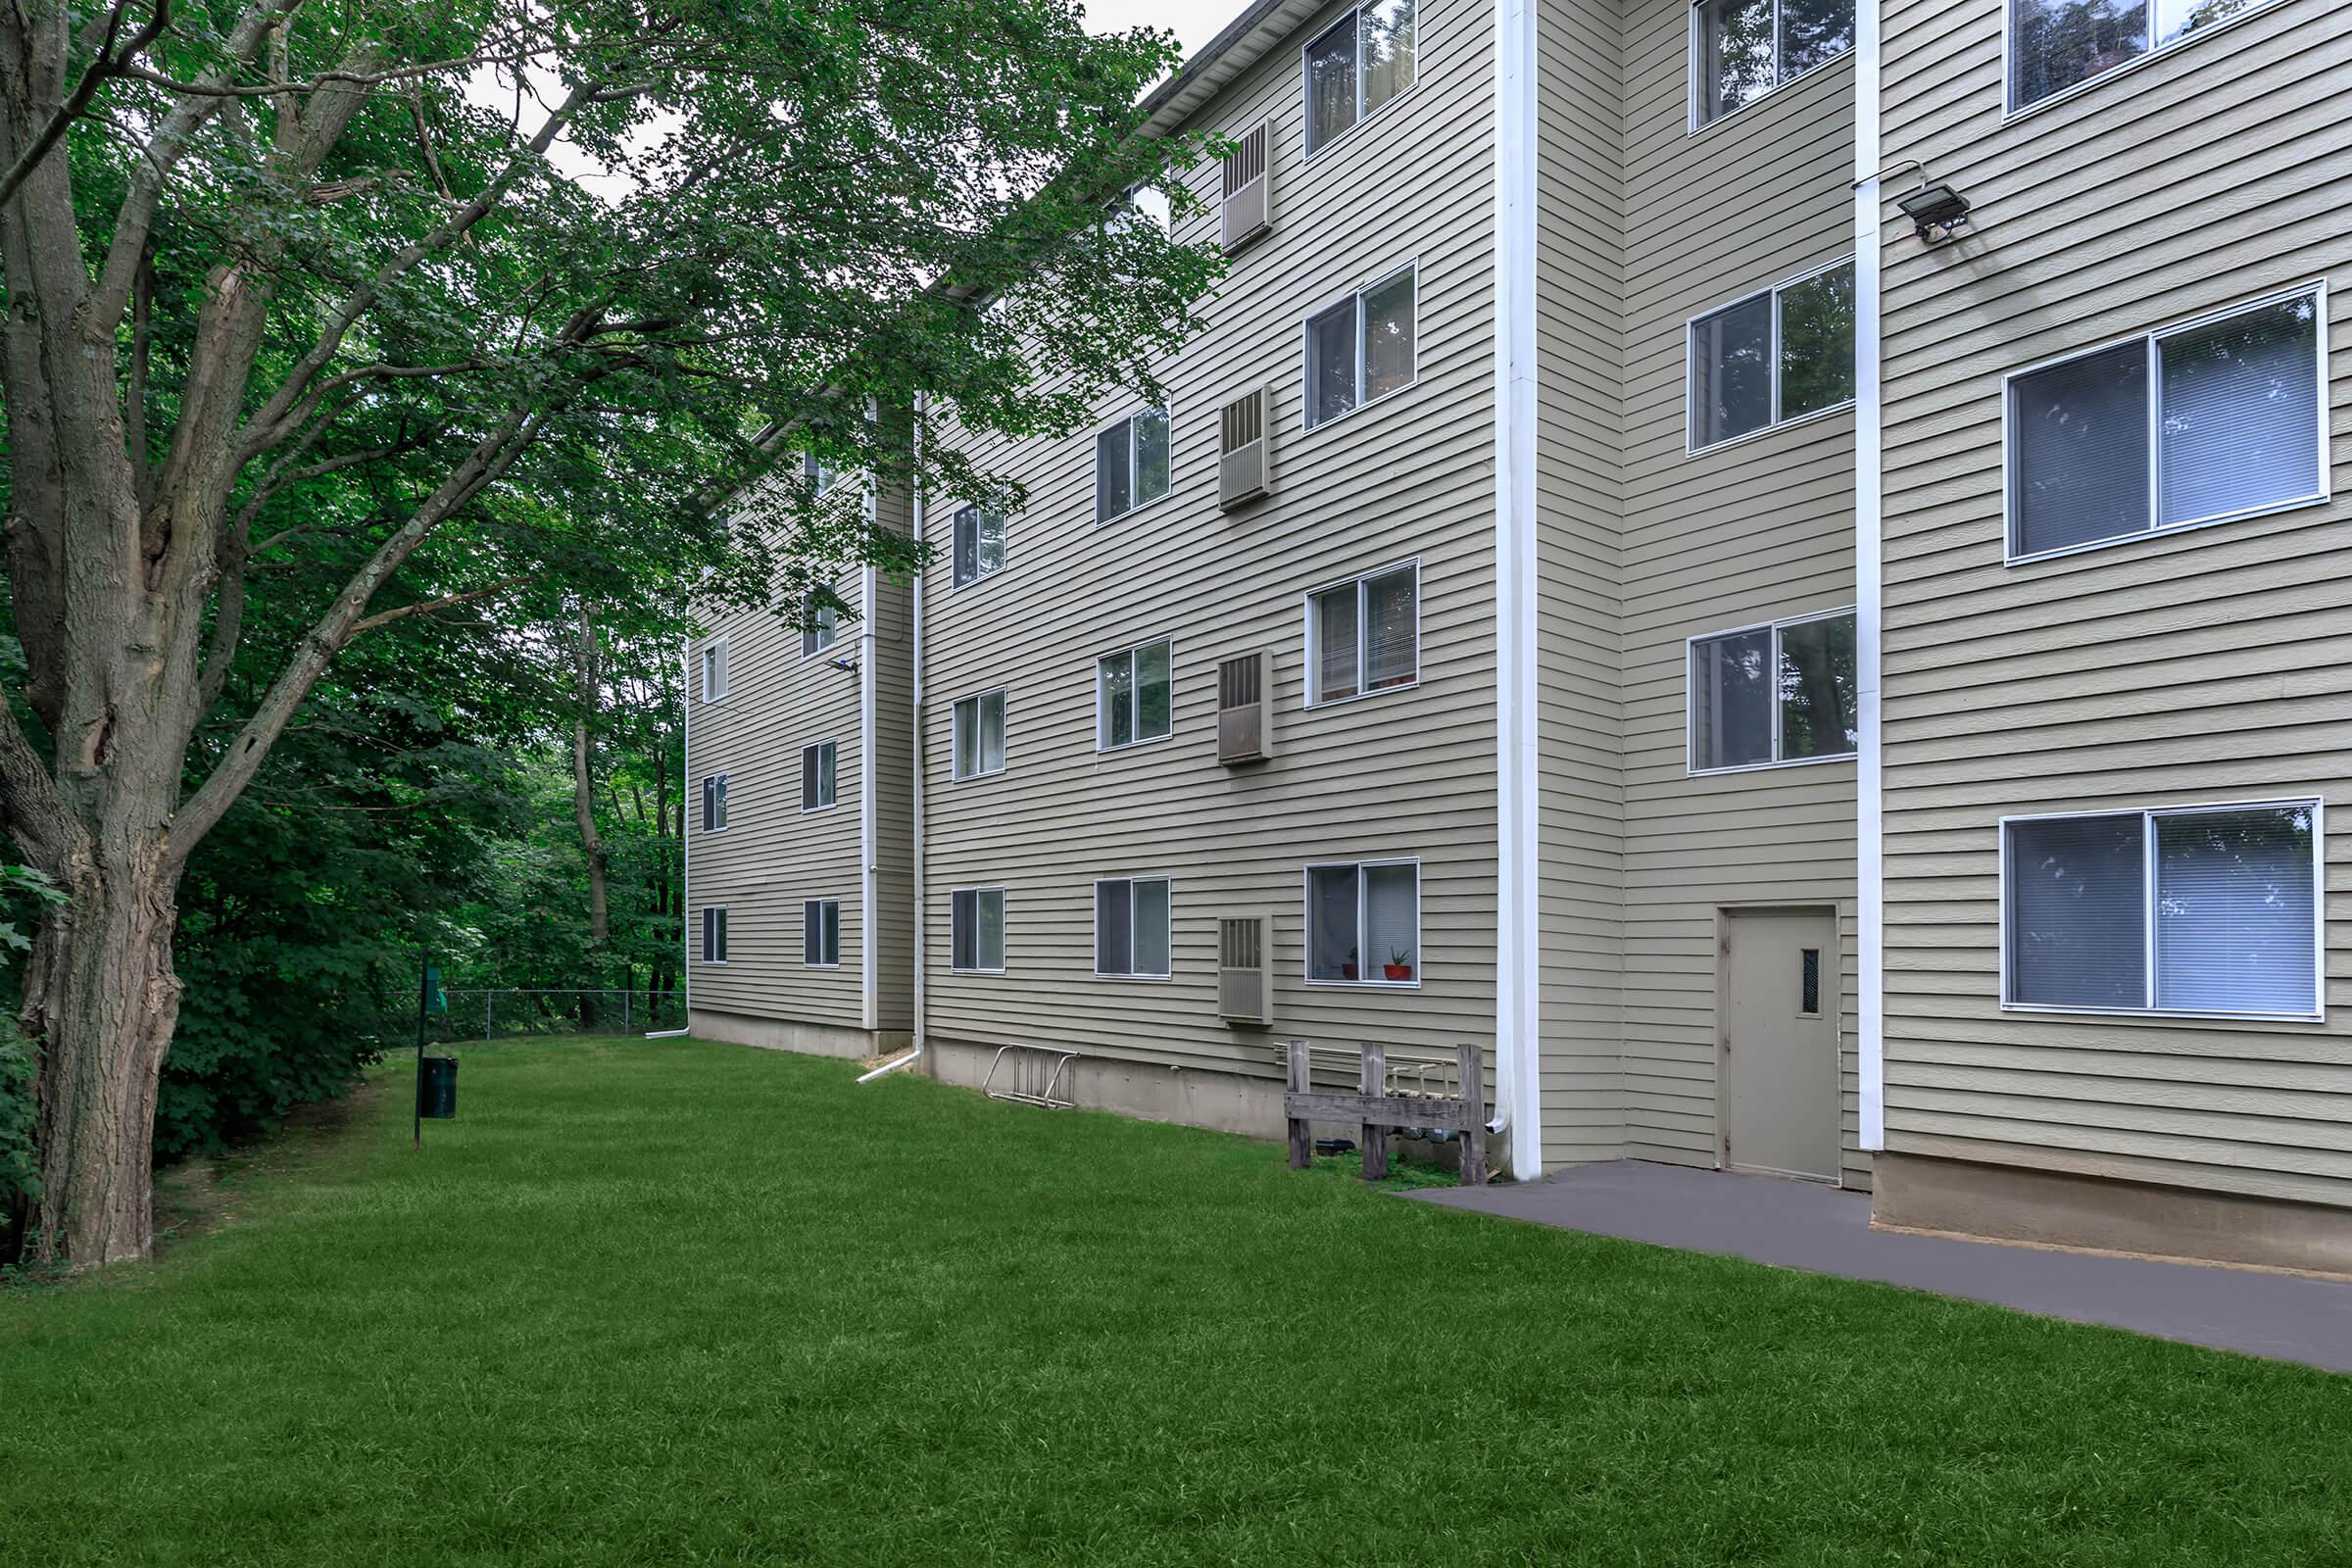 LUSH GREEN LANDSCAPING AT LAKEVIEW APARTMENTS